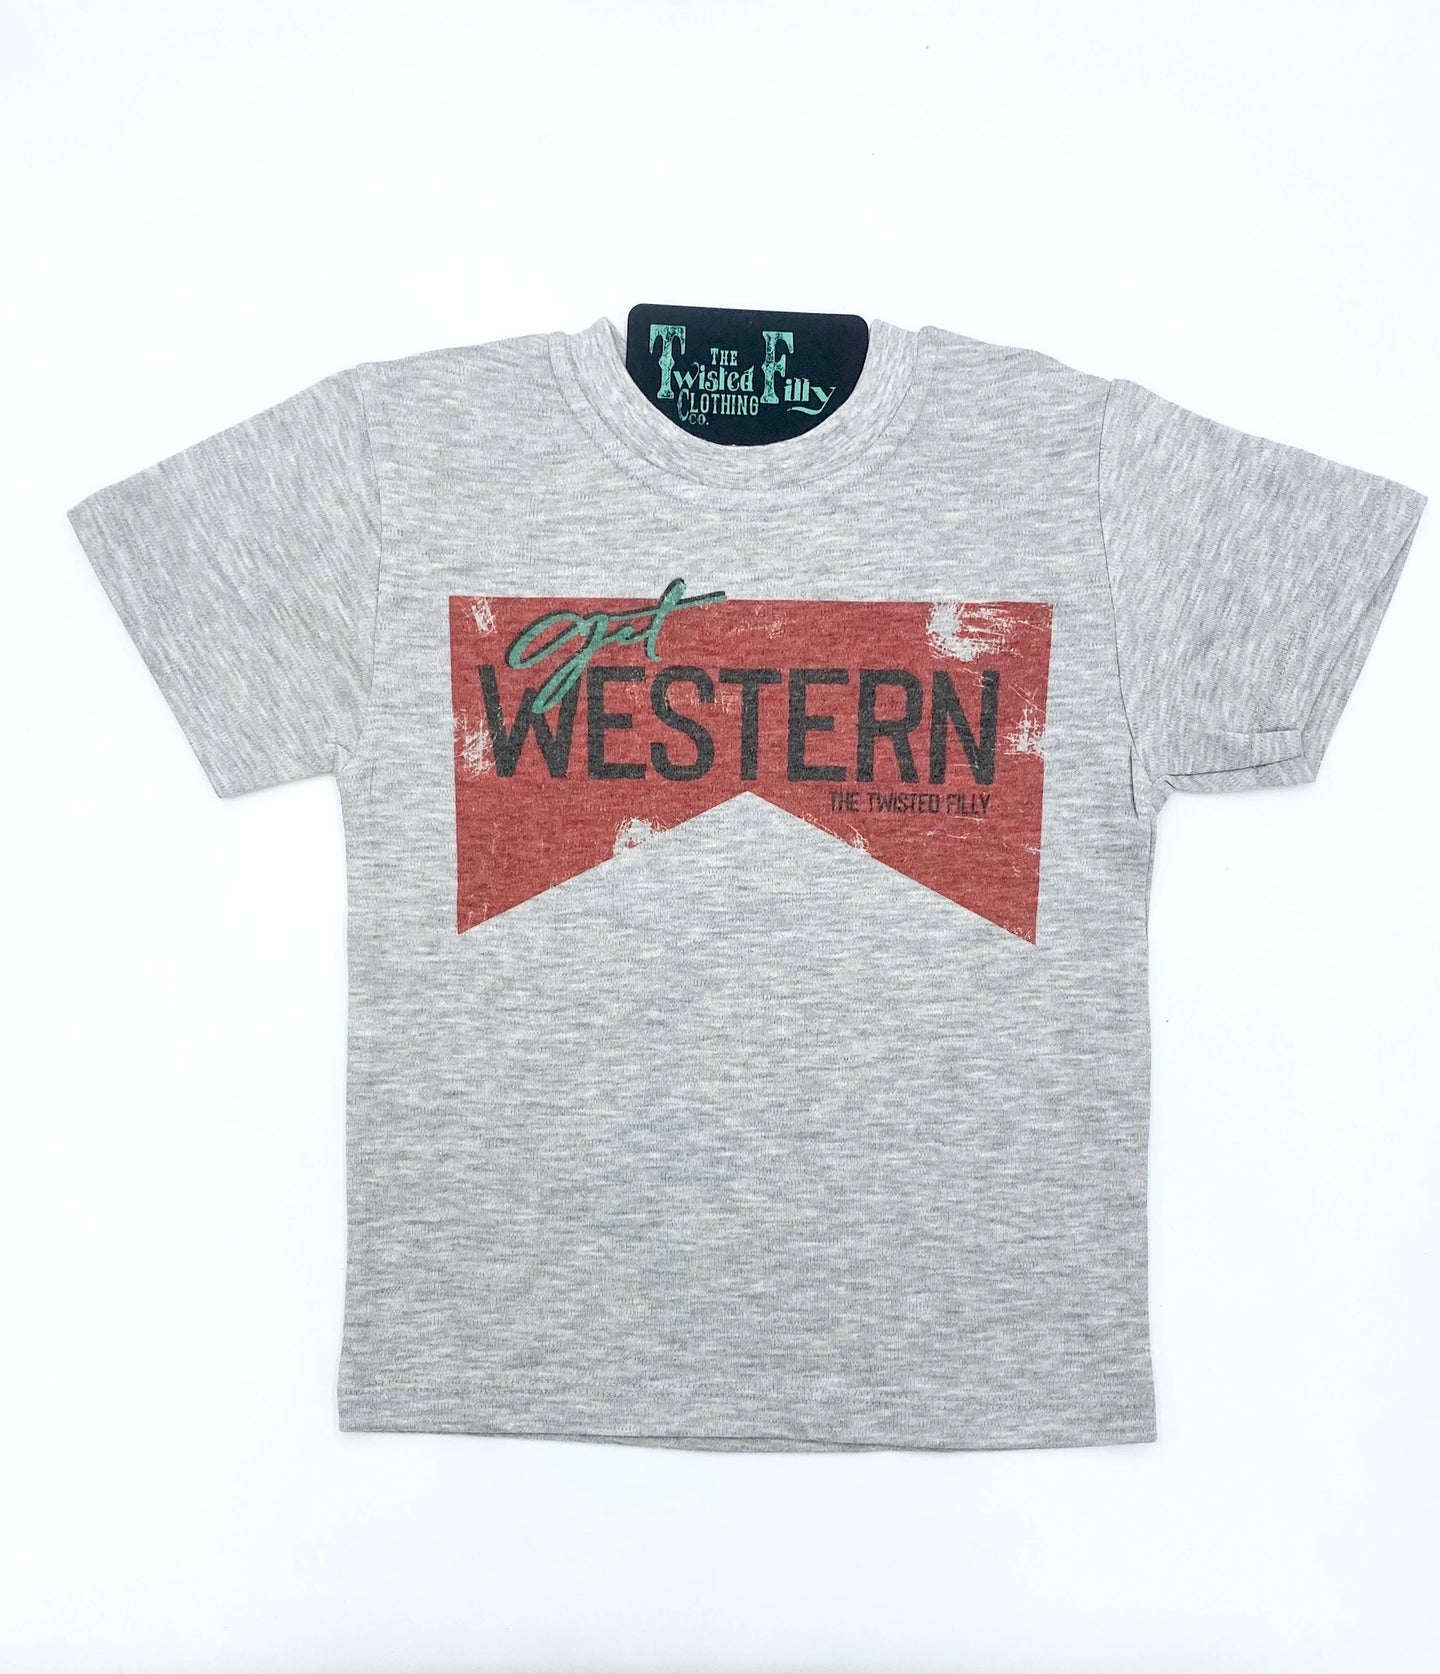 THE TWISTED FILLY CLOTHING CO. Get Western - S/S Toddler Tee - Grey